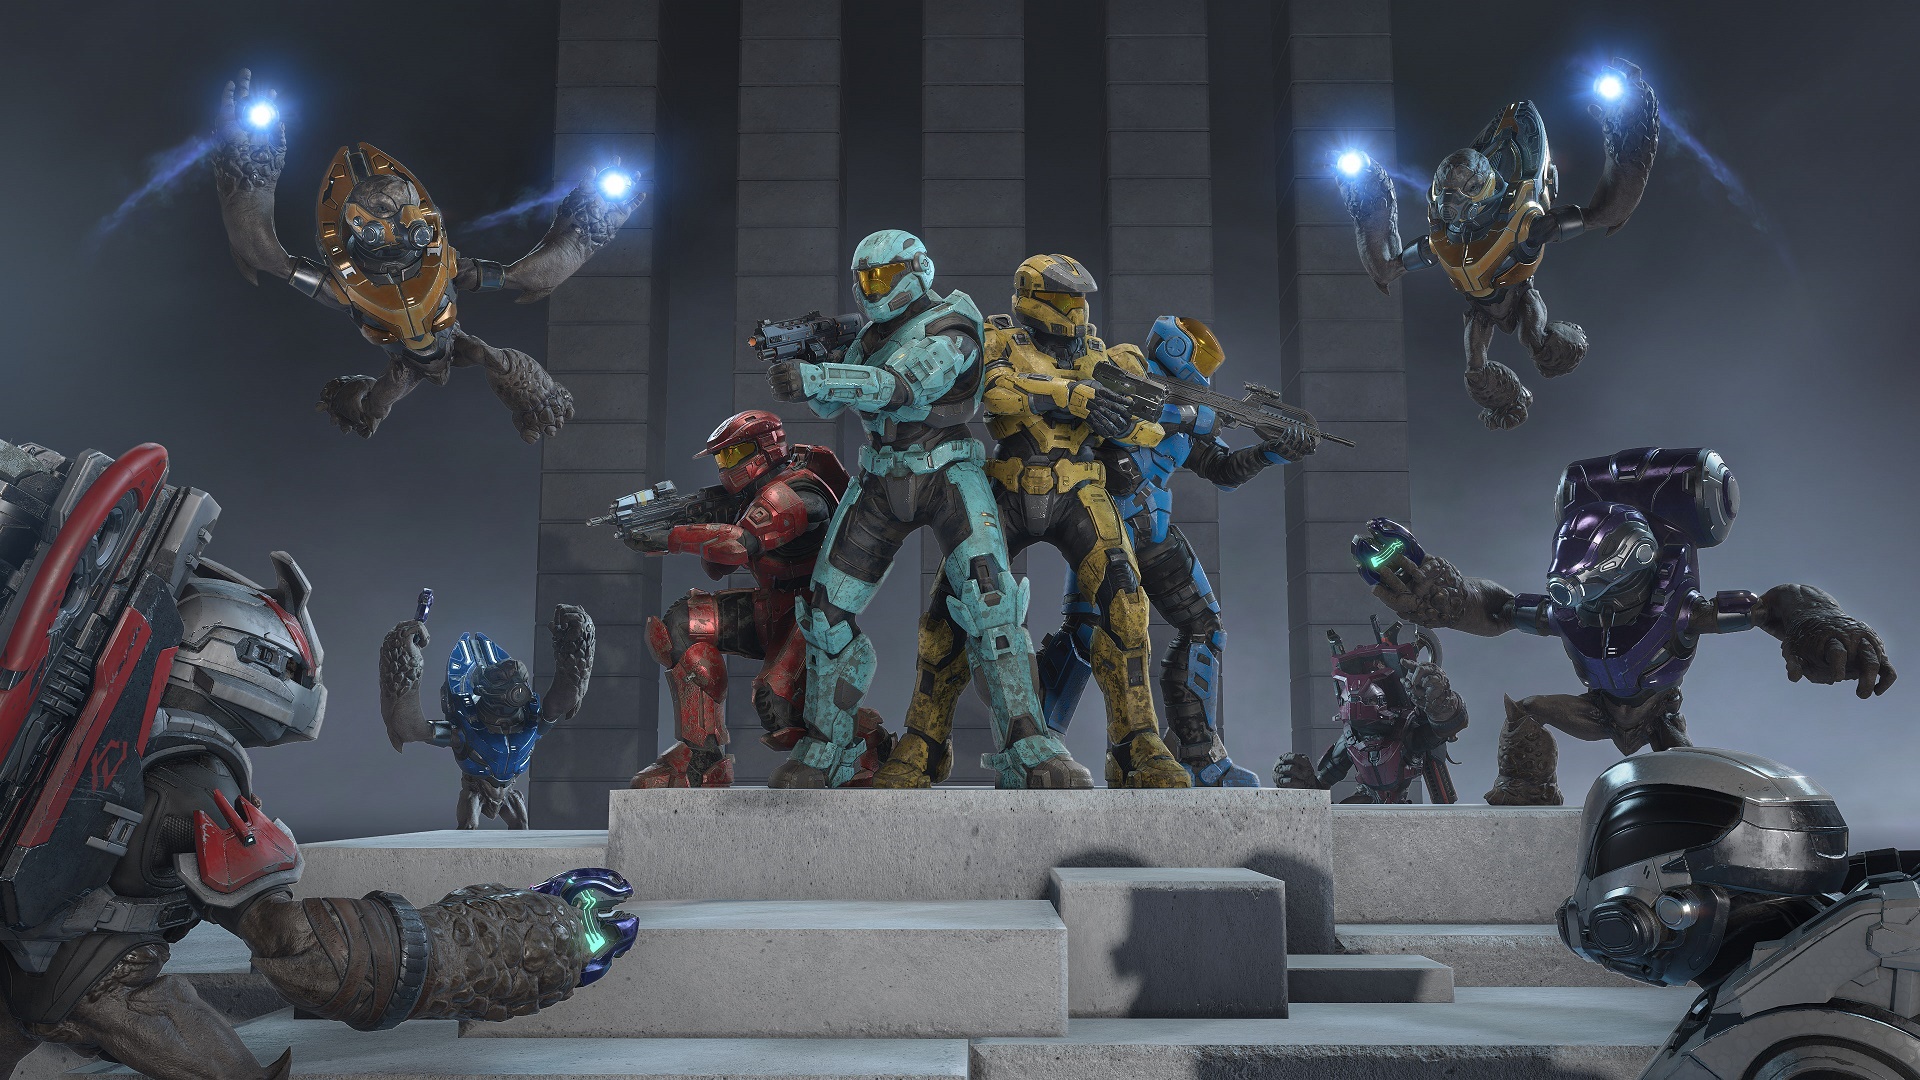 Halo Infinite image of the Gruntpocalypse mode showing Spartans standing off against Grunts